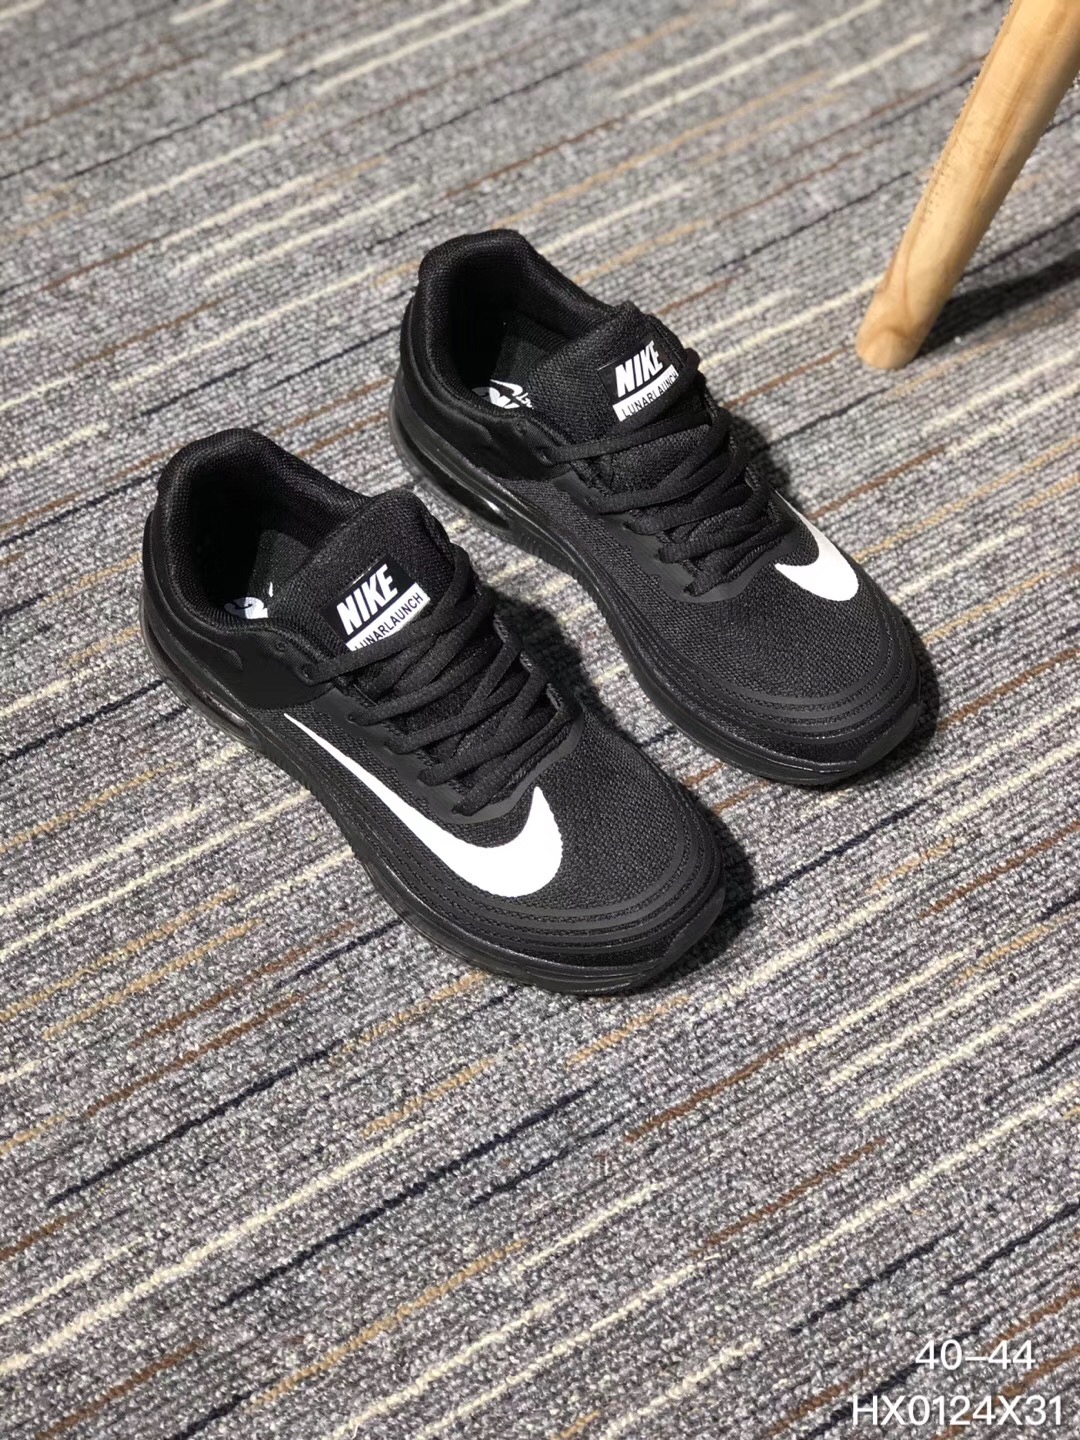 Nike Air Max 2018 Flyknit Black White Running Shoes - Click Image to Close